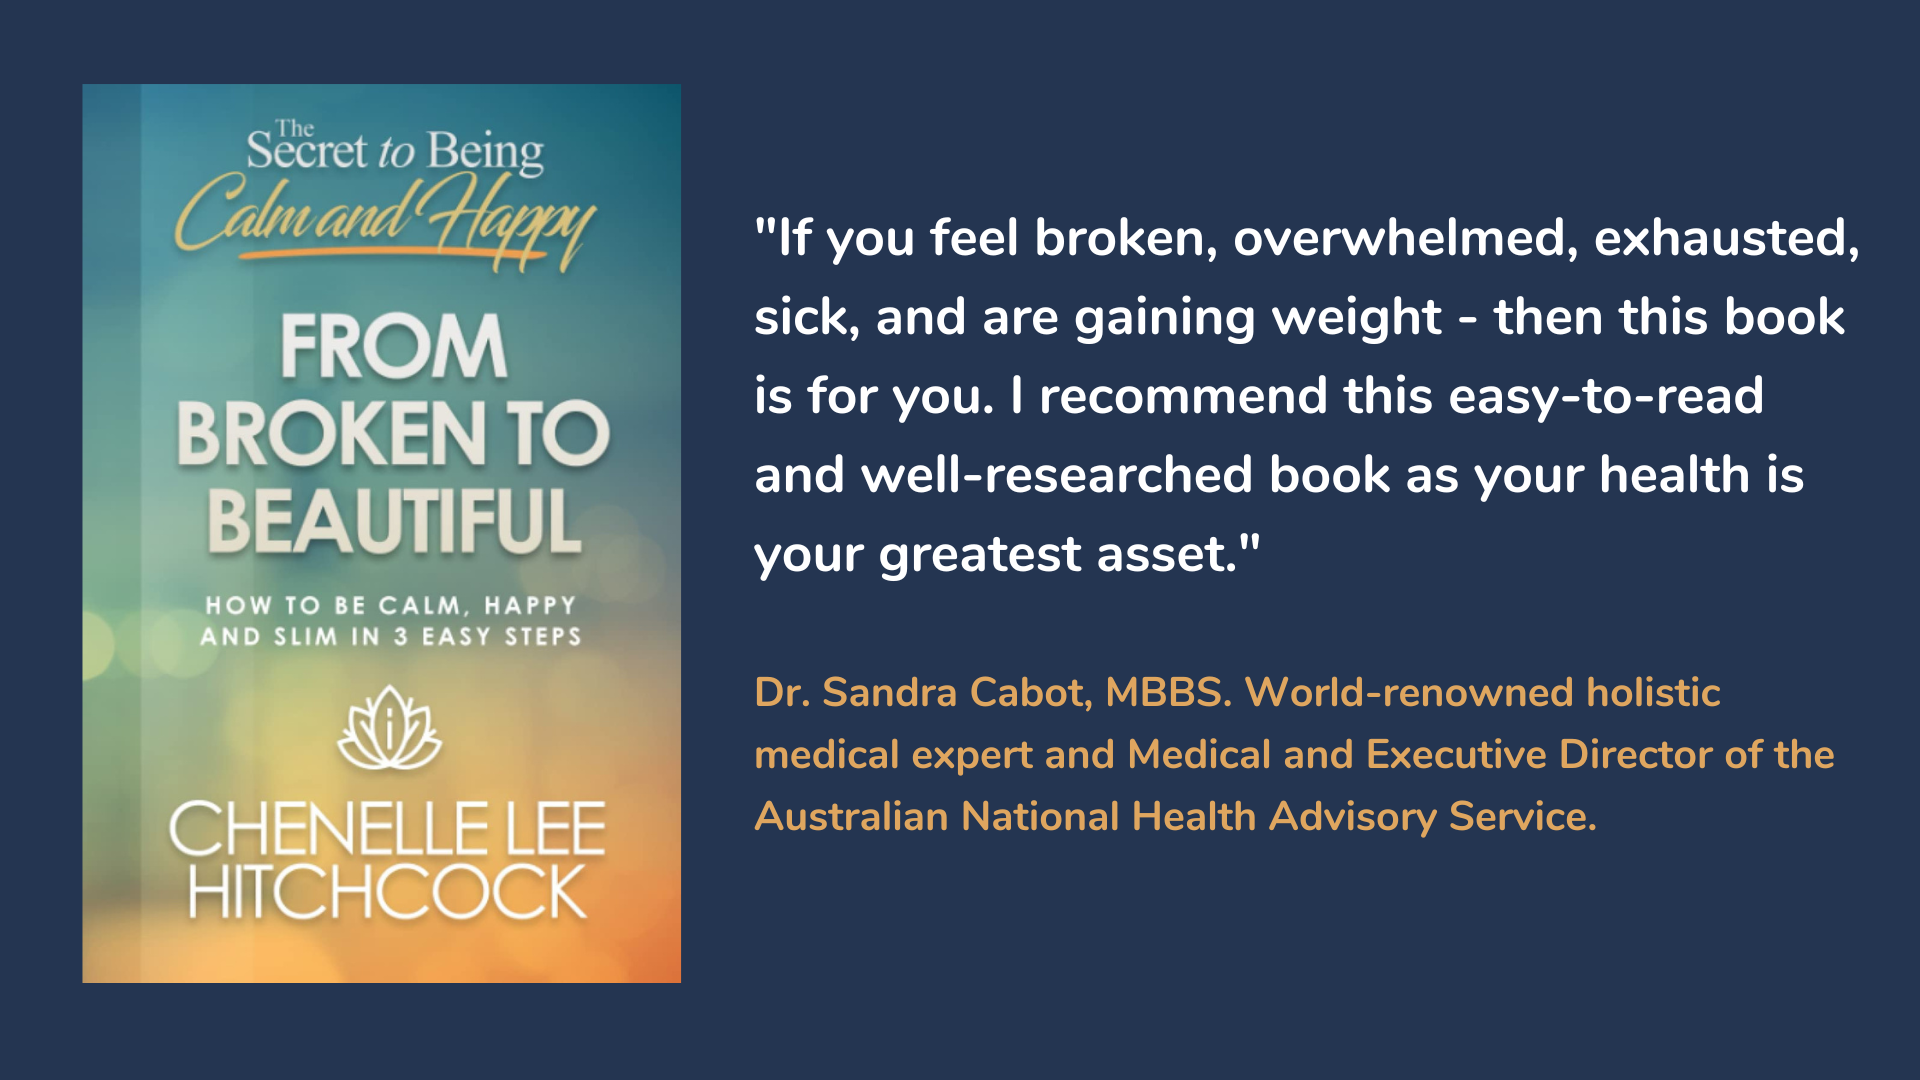 From Broken to Beautiful: How to Be Calm, Happy, and Slim in 3 Easy Steps, book cover and description